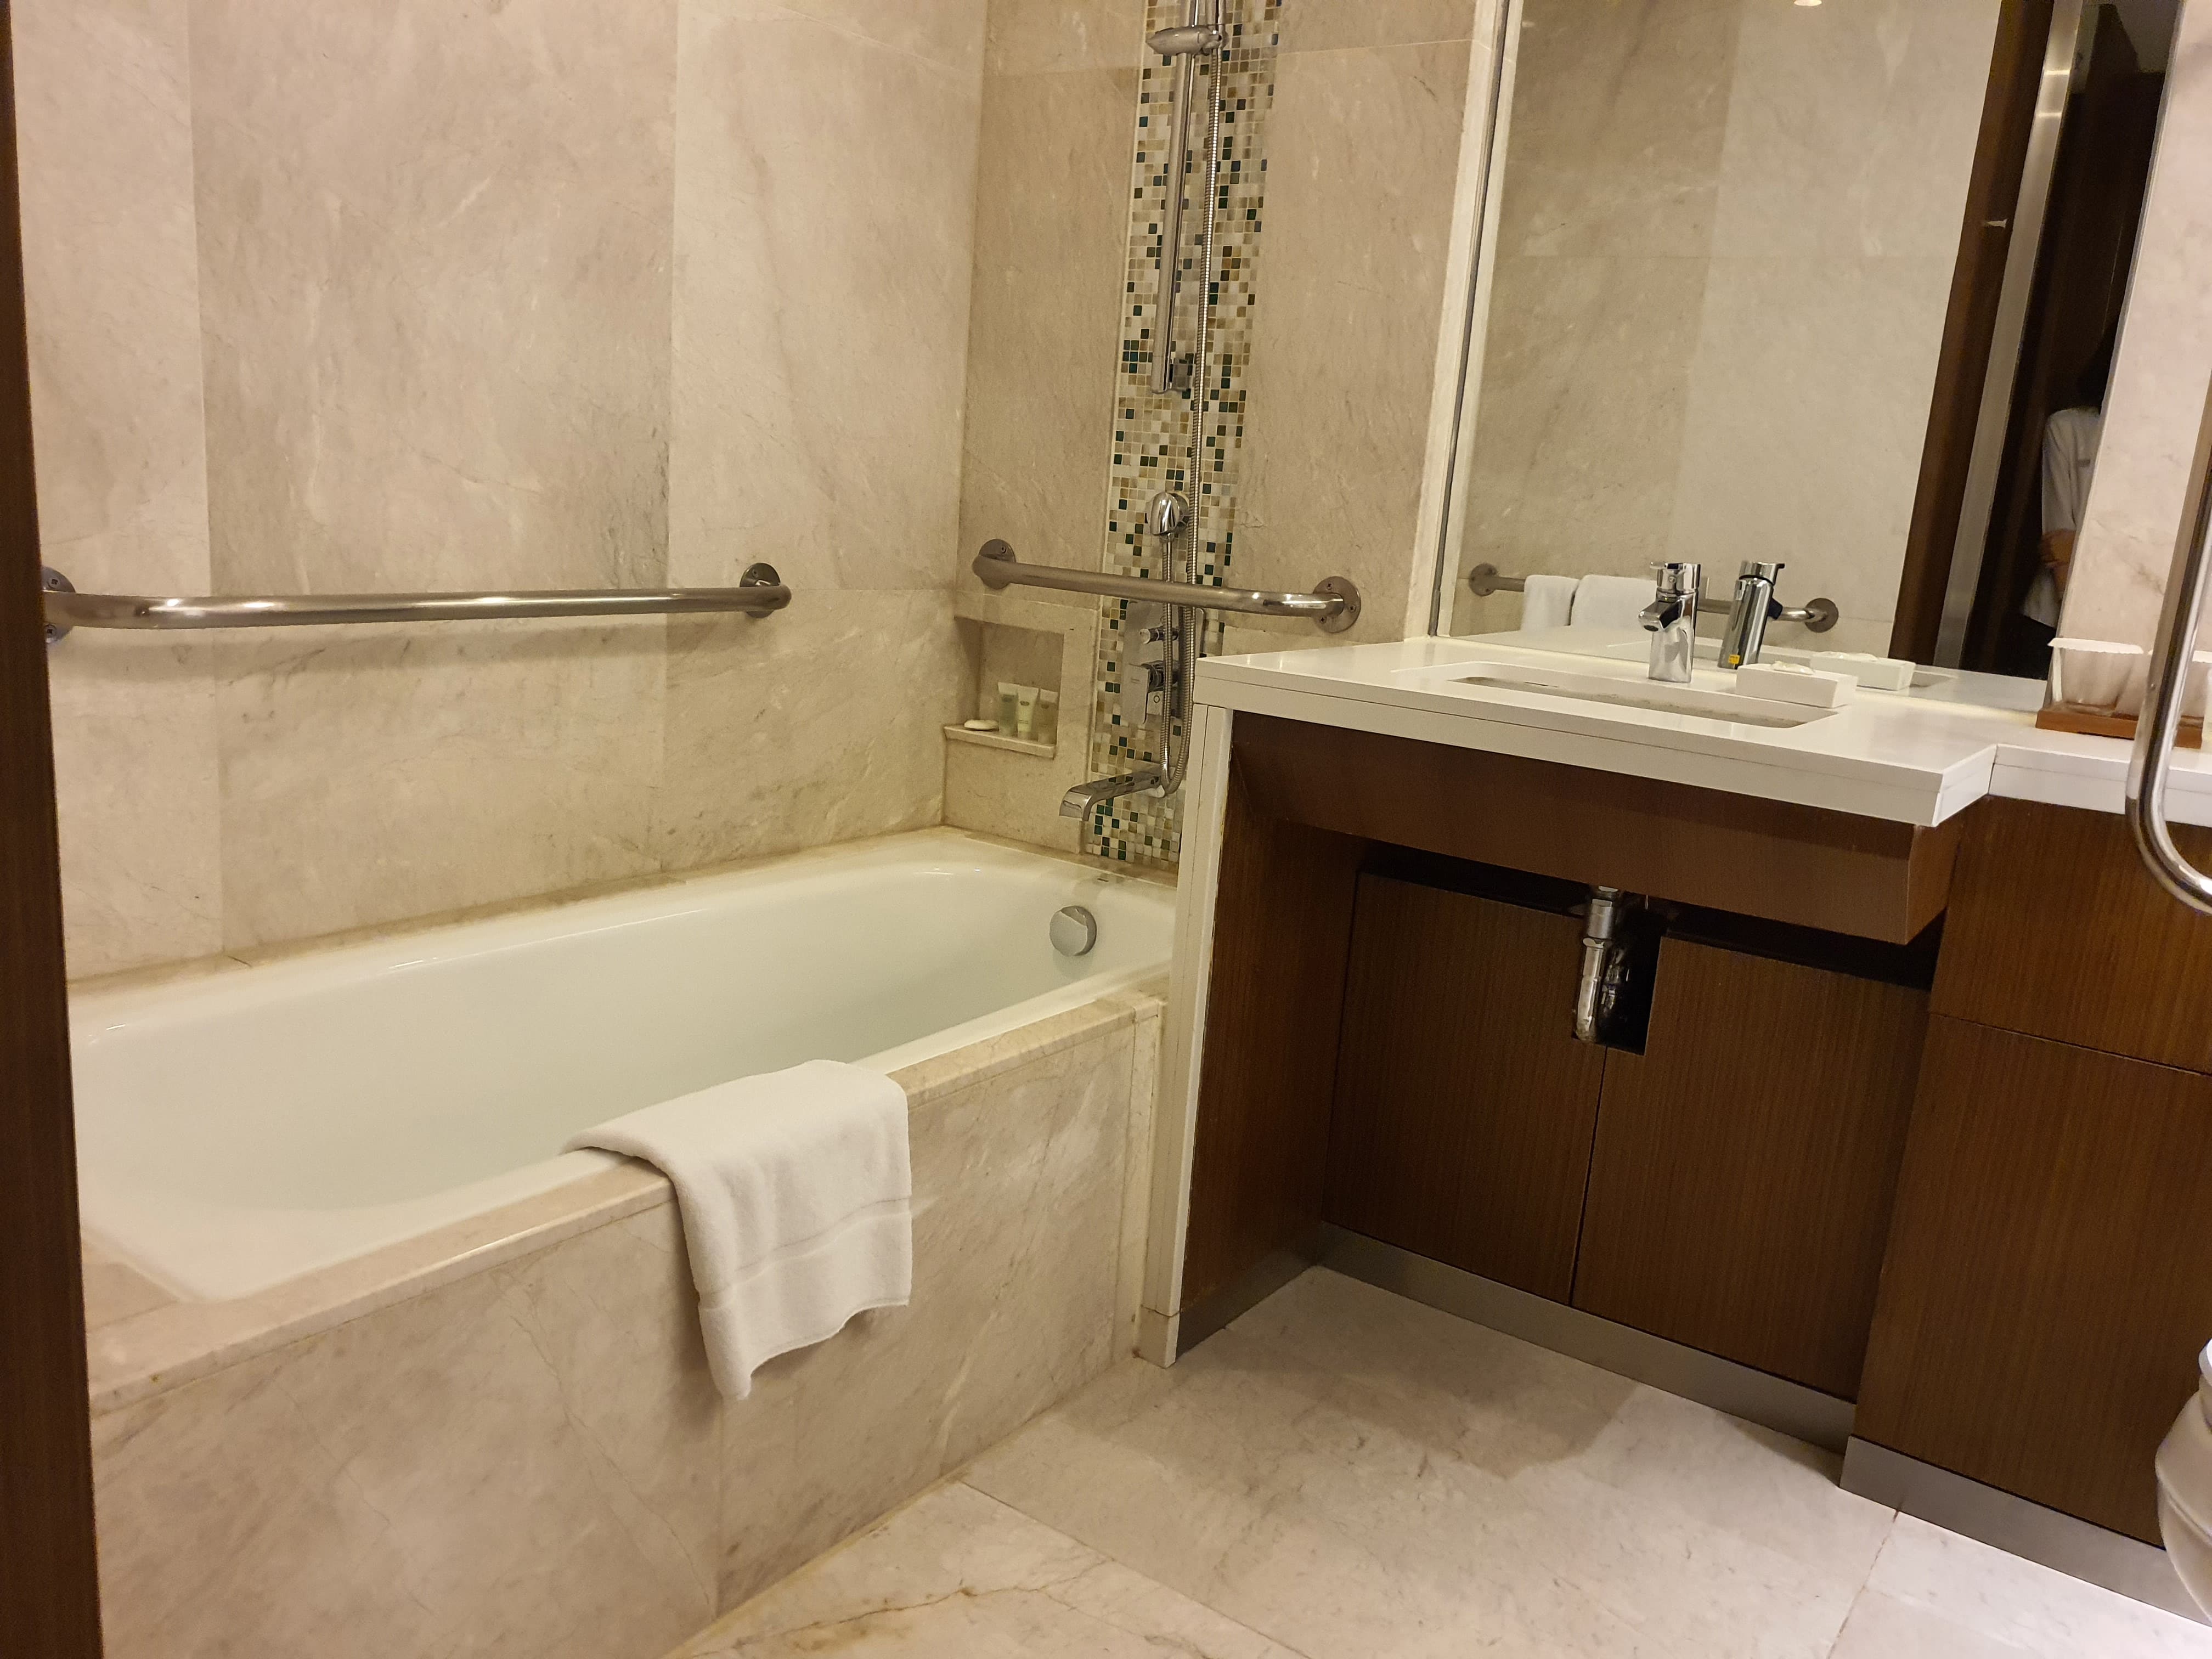 Accessible restroom for persons with disabilities0 : Bathroom with a sink and a bath tub